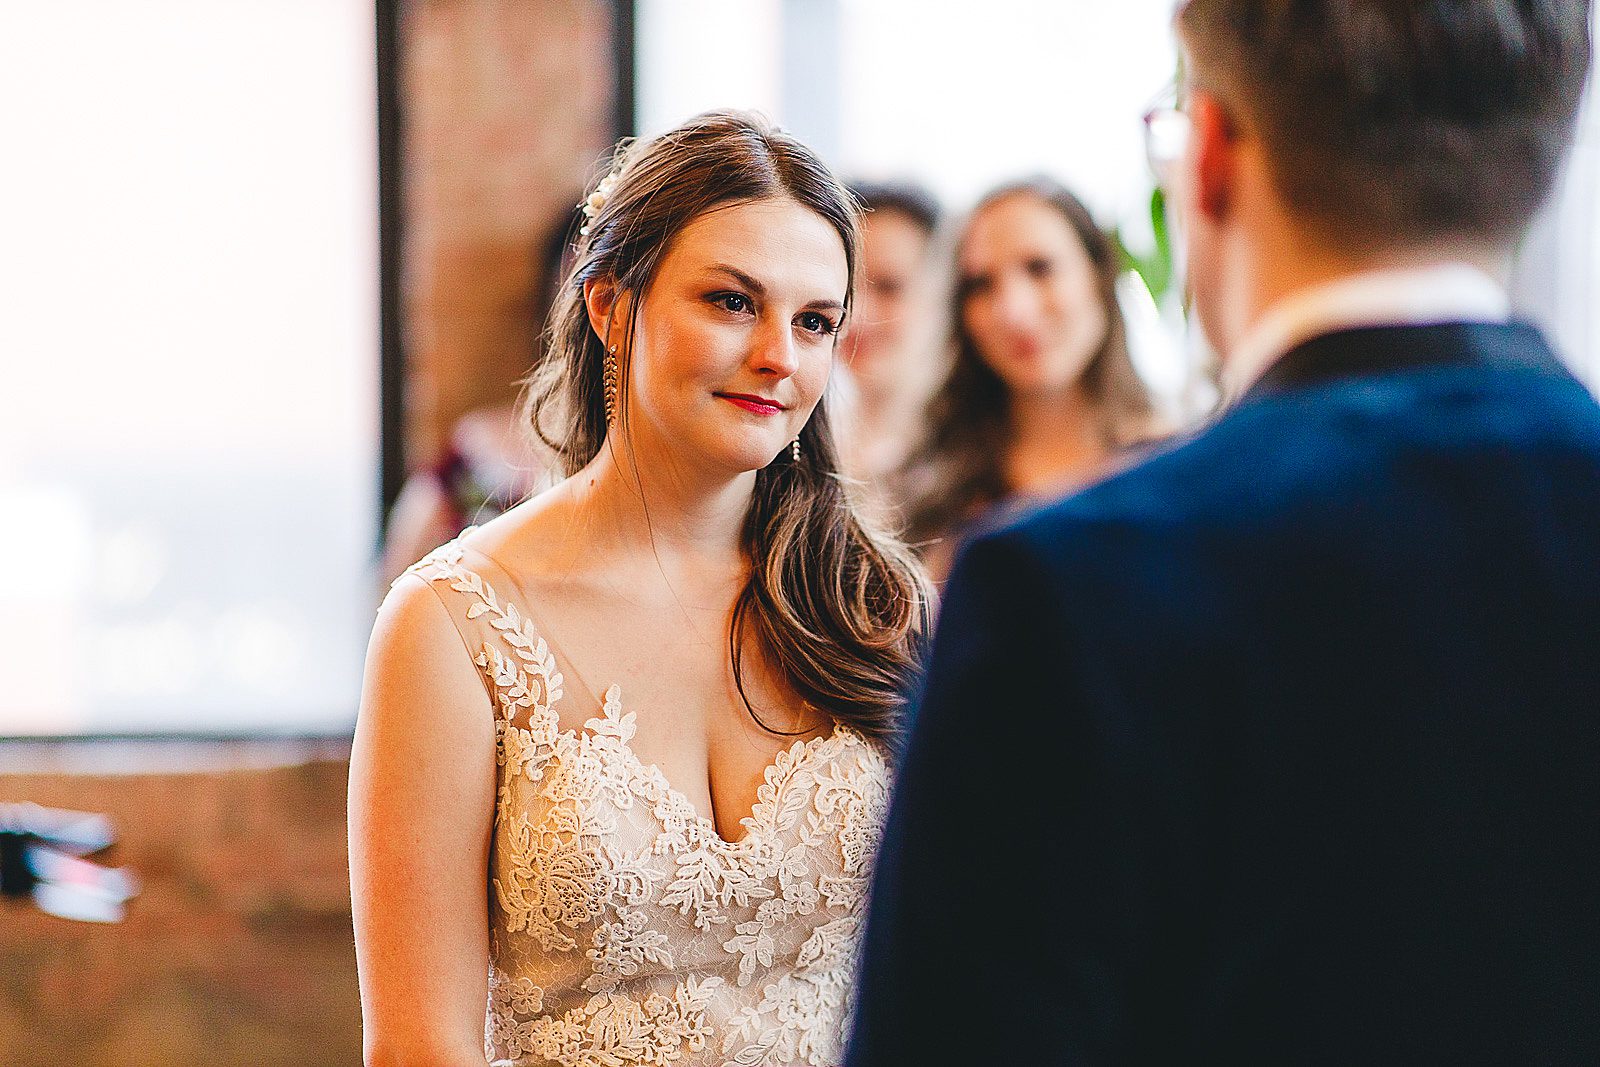 40 chicago wedding photograhy - The Wedding of Samantha + Kyle in Chicago